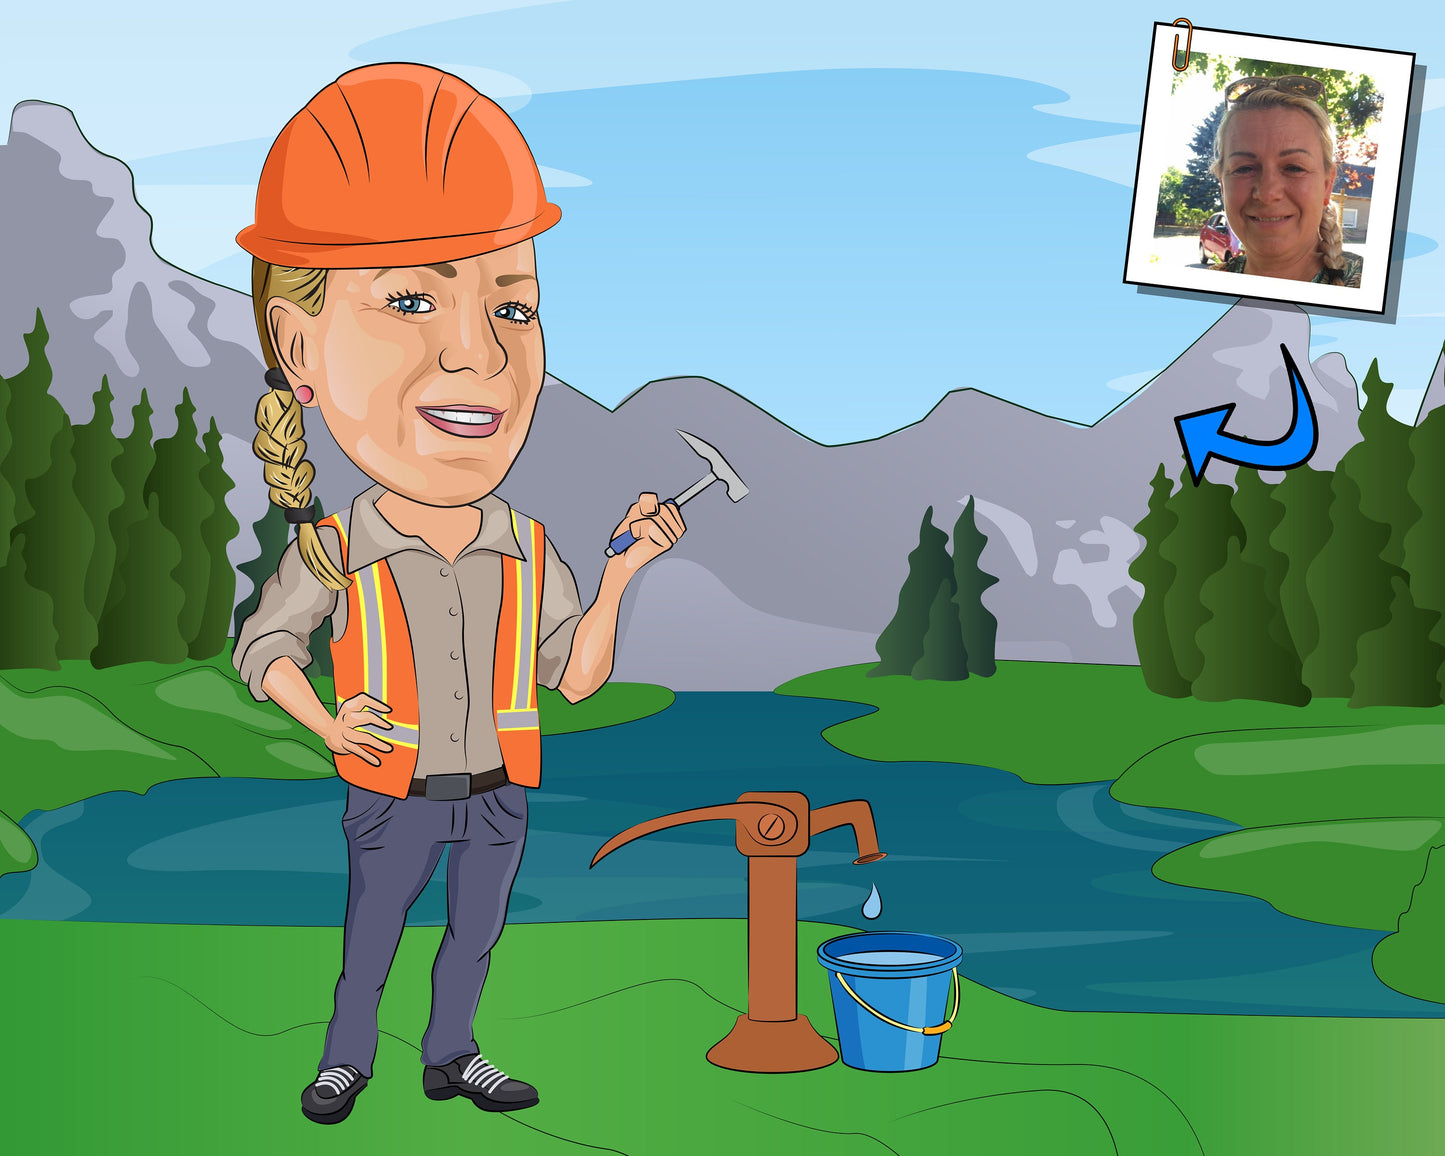 Hydrogeologist Gift - Custom Caricature Portrait From Your Photo